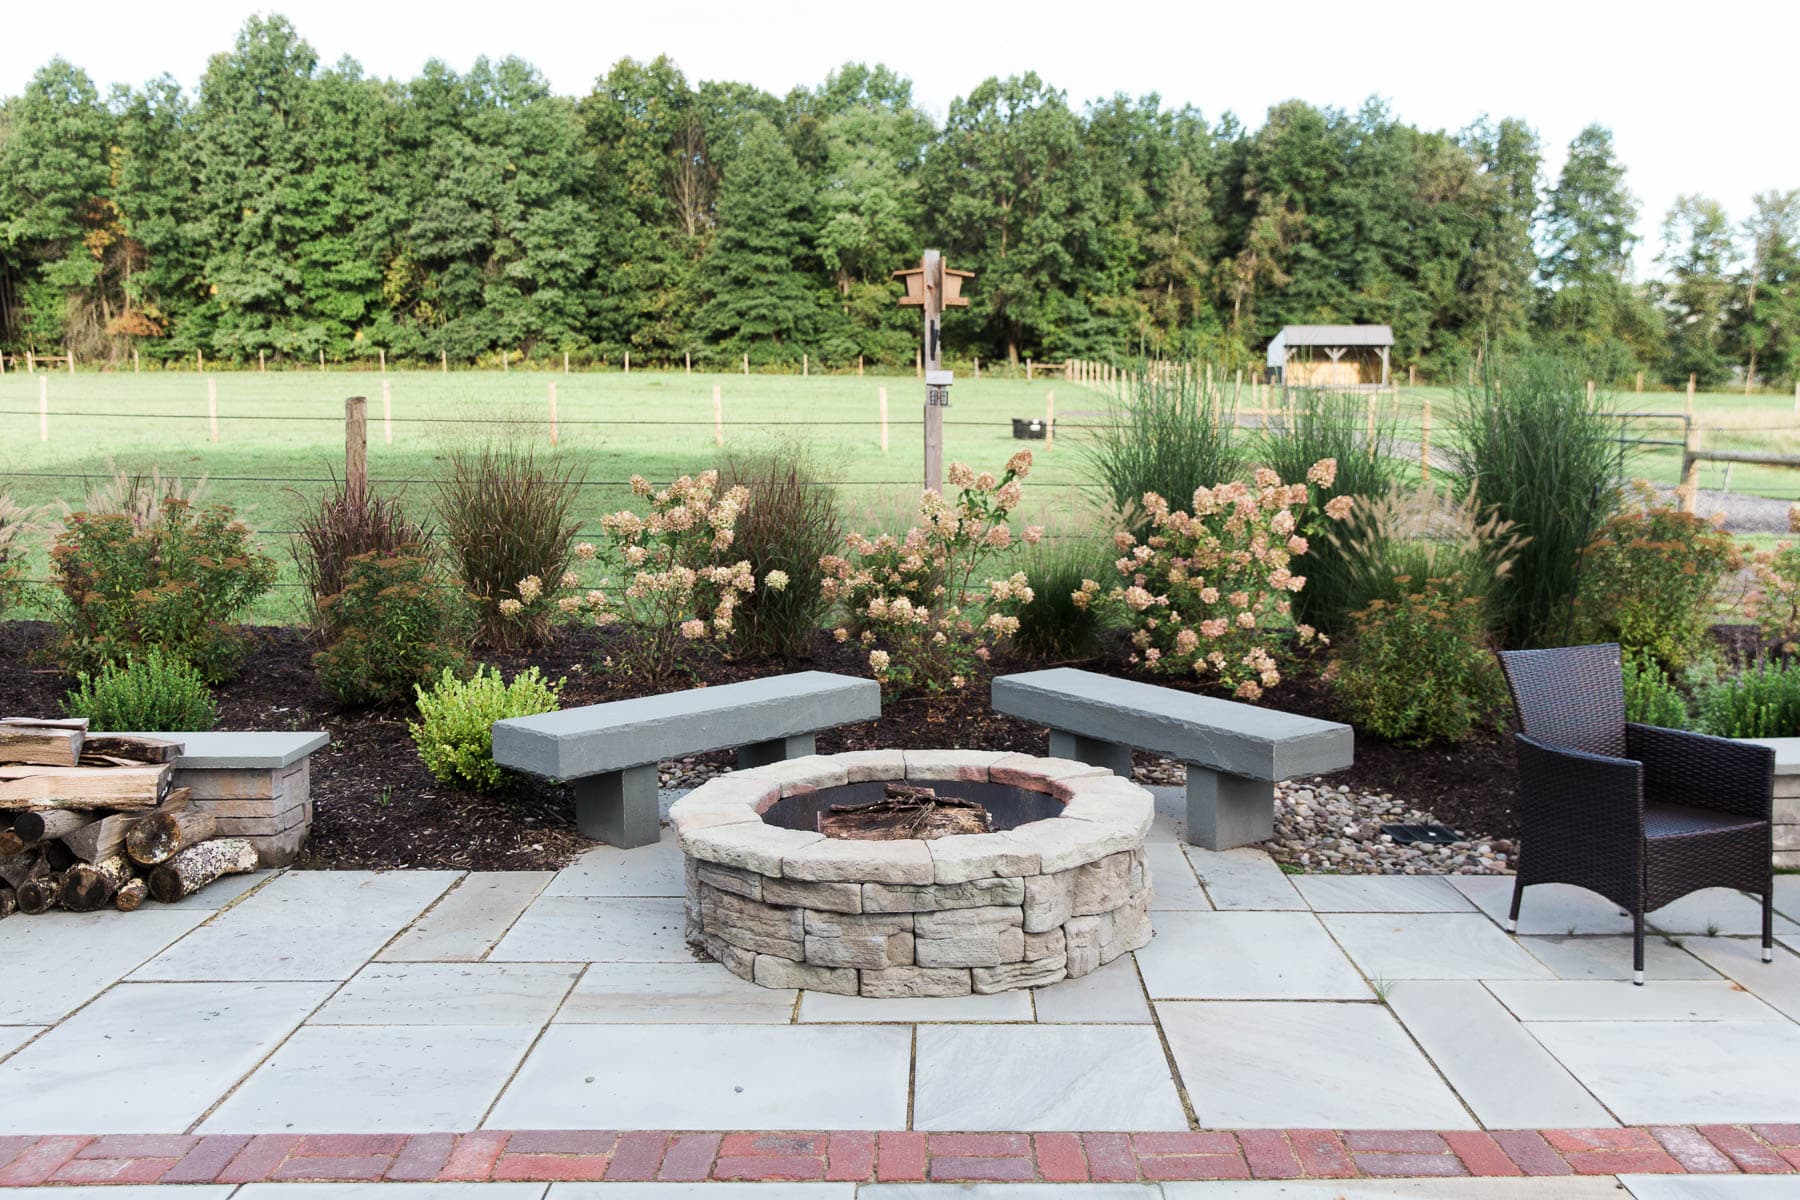 A circular precast concrete fire pit and bluestone slab benches on a rectilinear bluestone patio with native plants like hydrangea and spirea behind, installed by Masseo Landscape, Inc. Hudson Valley Landscaper